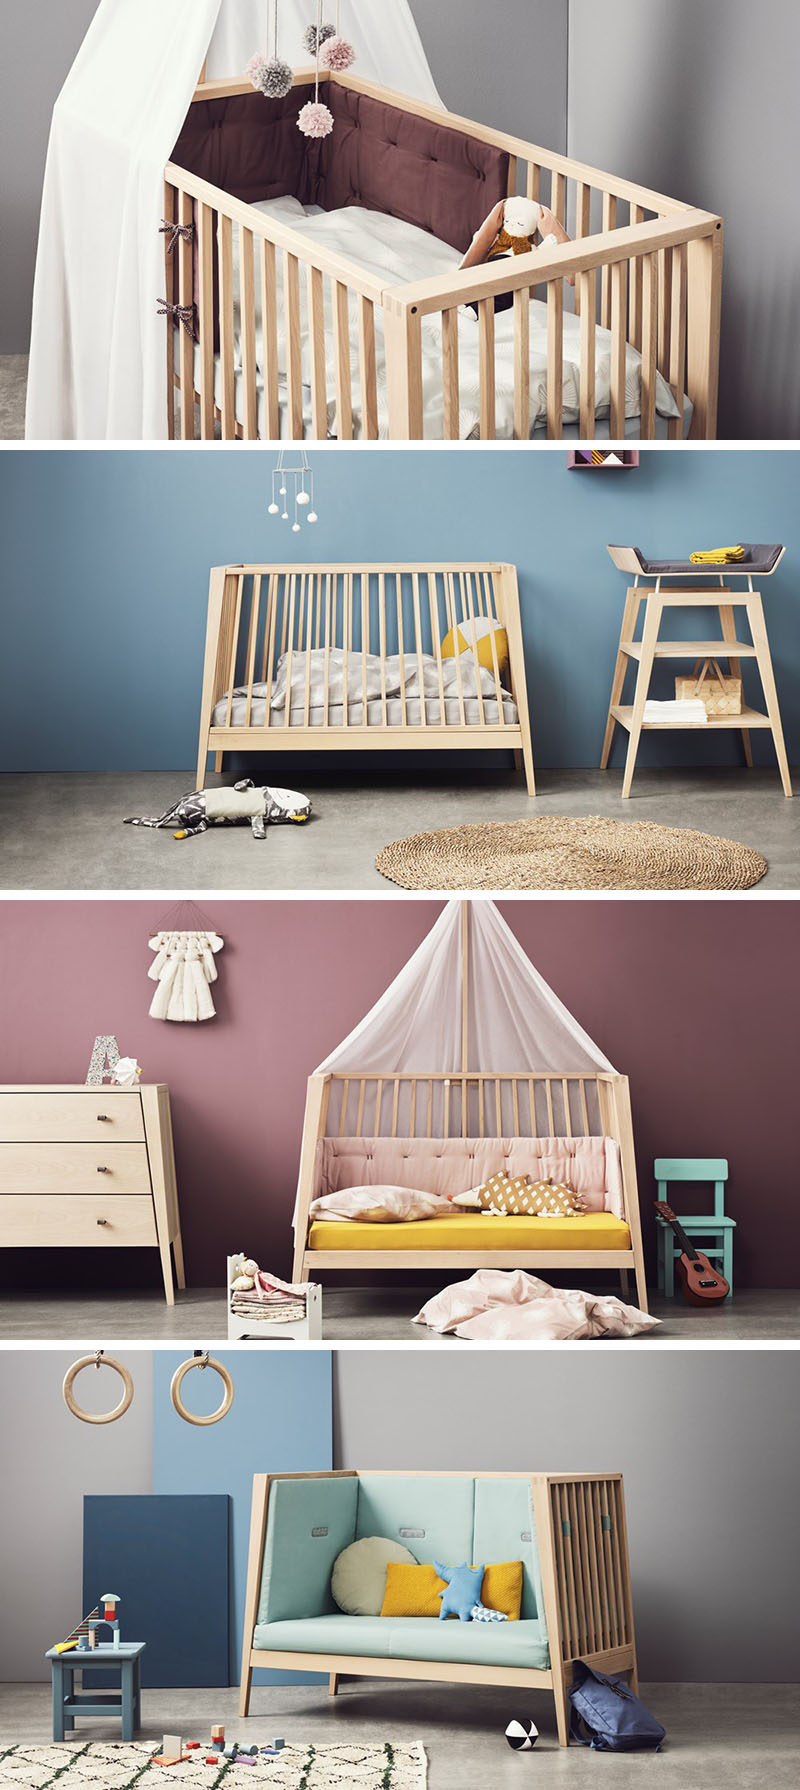 This transitional modern nursery furniture is baby cot that transforms into a small day bed or couch as the child grows.